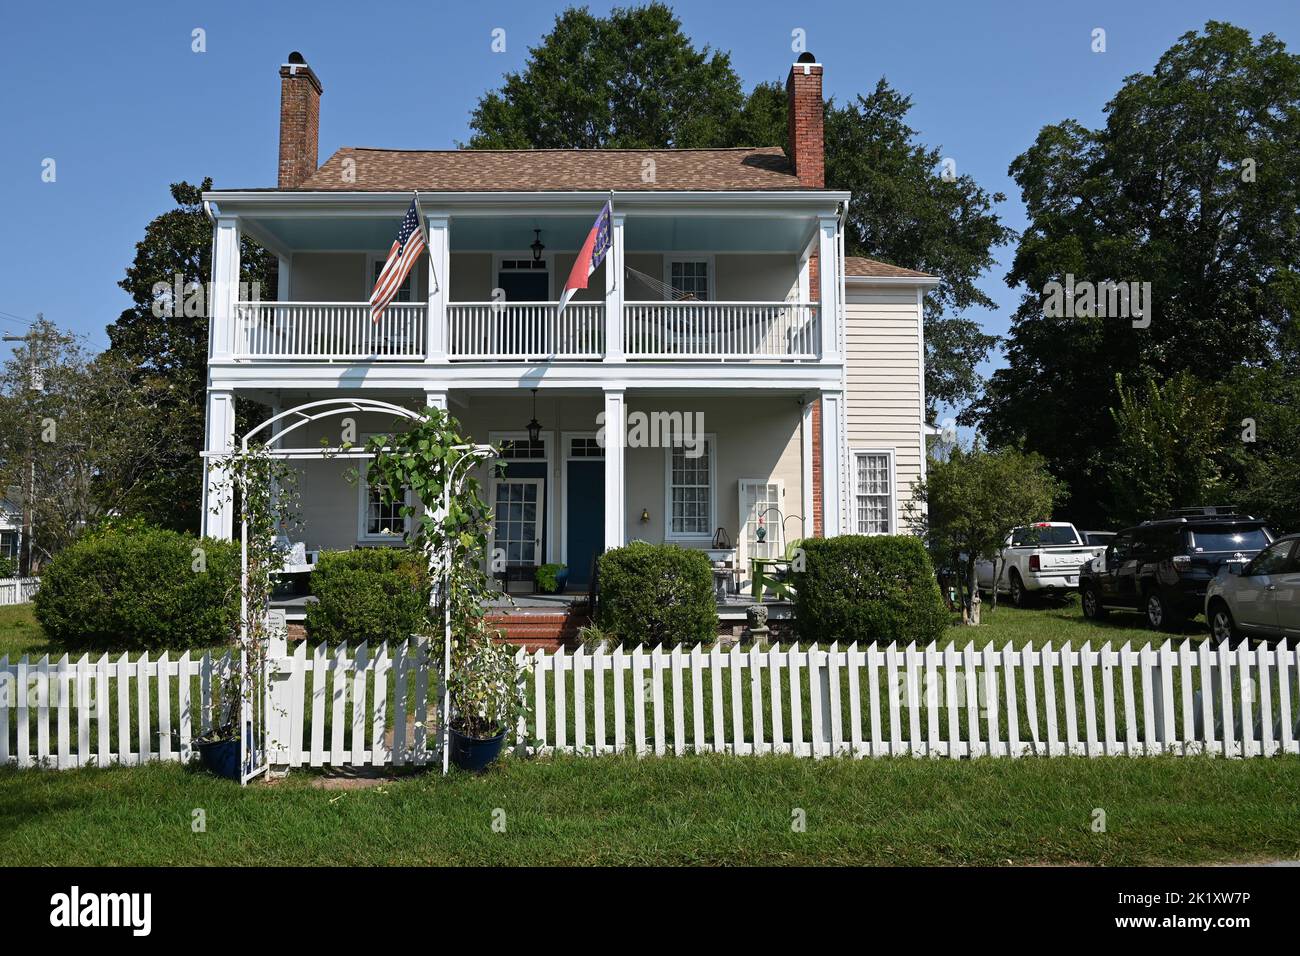 The Colonial Era Creecy Skinner Whedbee House in Hertford NC was built in 1775, pre-dating the American Revolution. Stock Photo